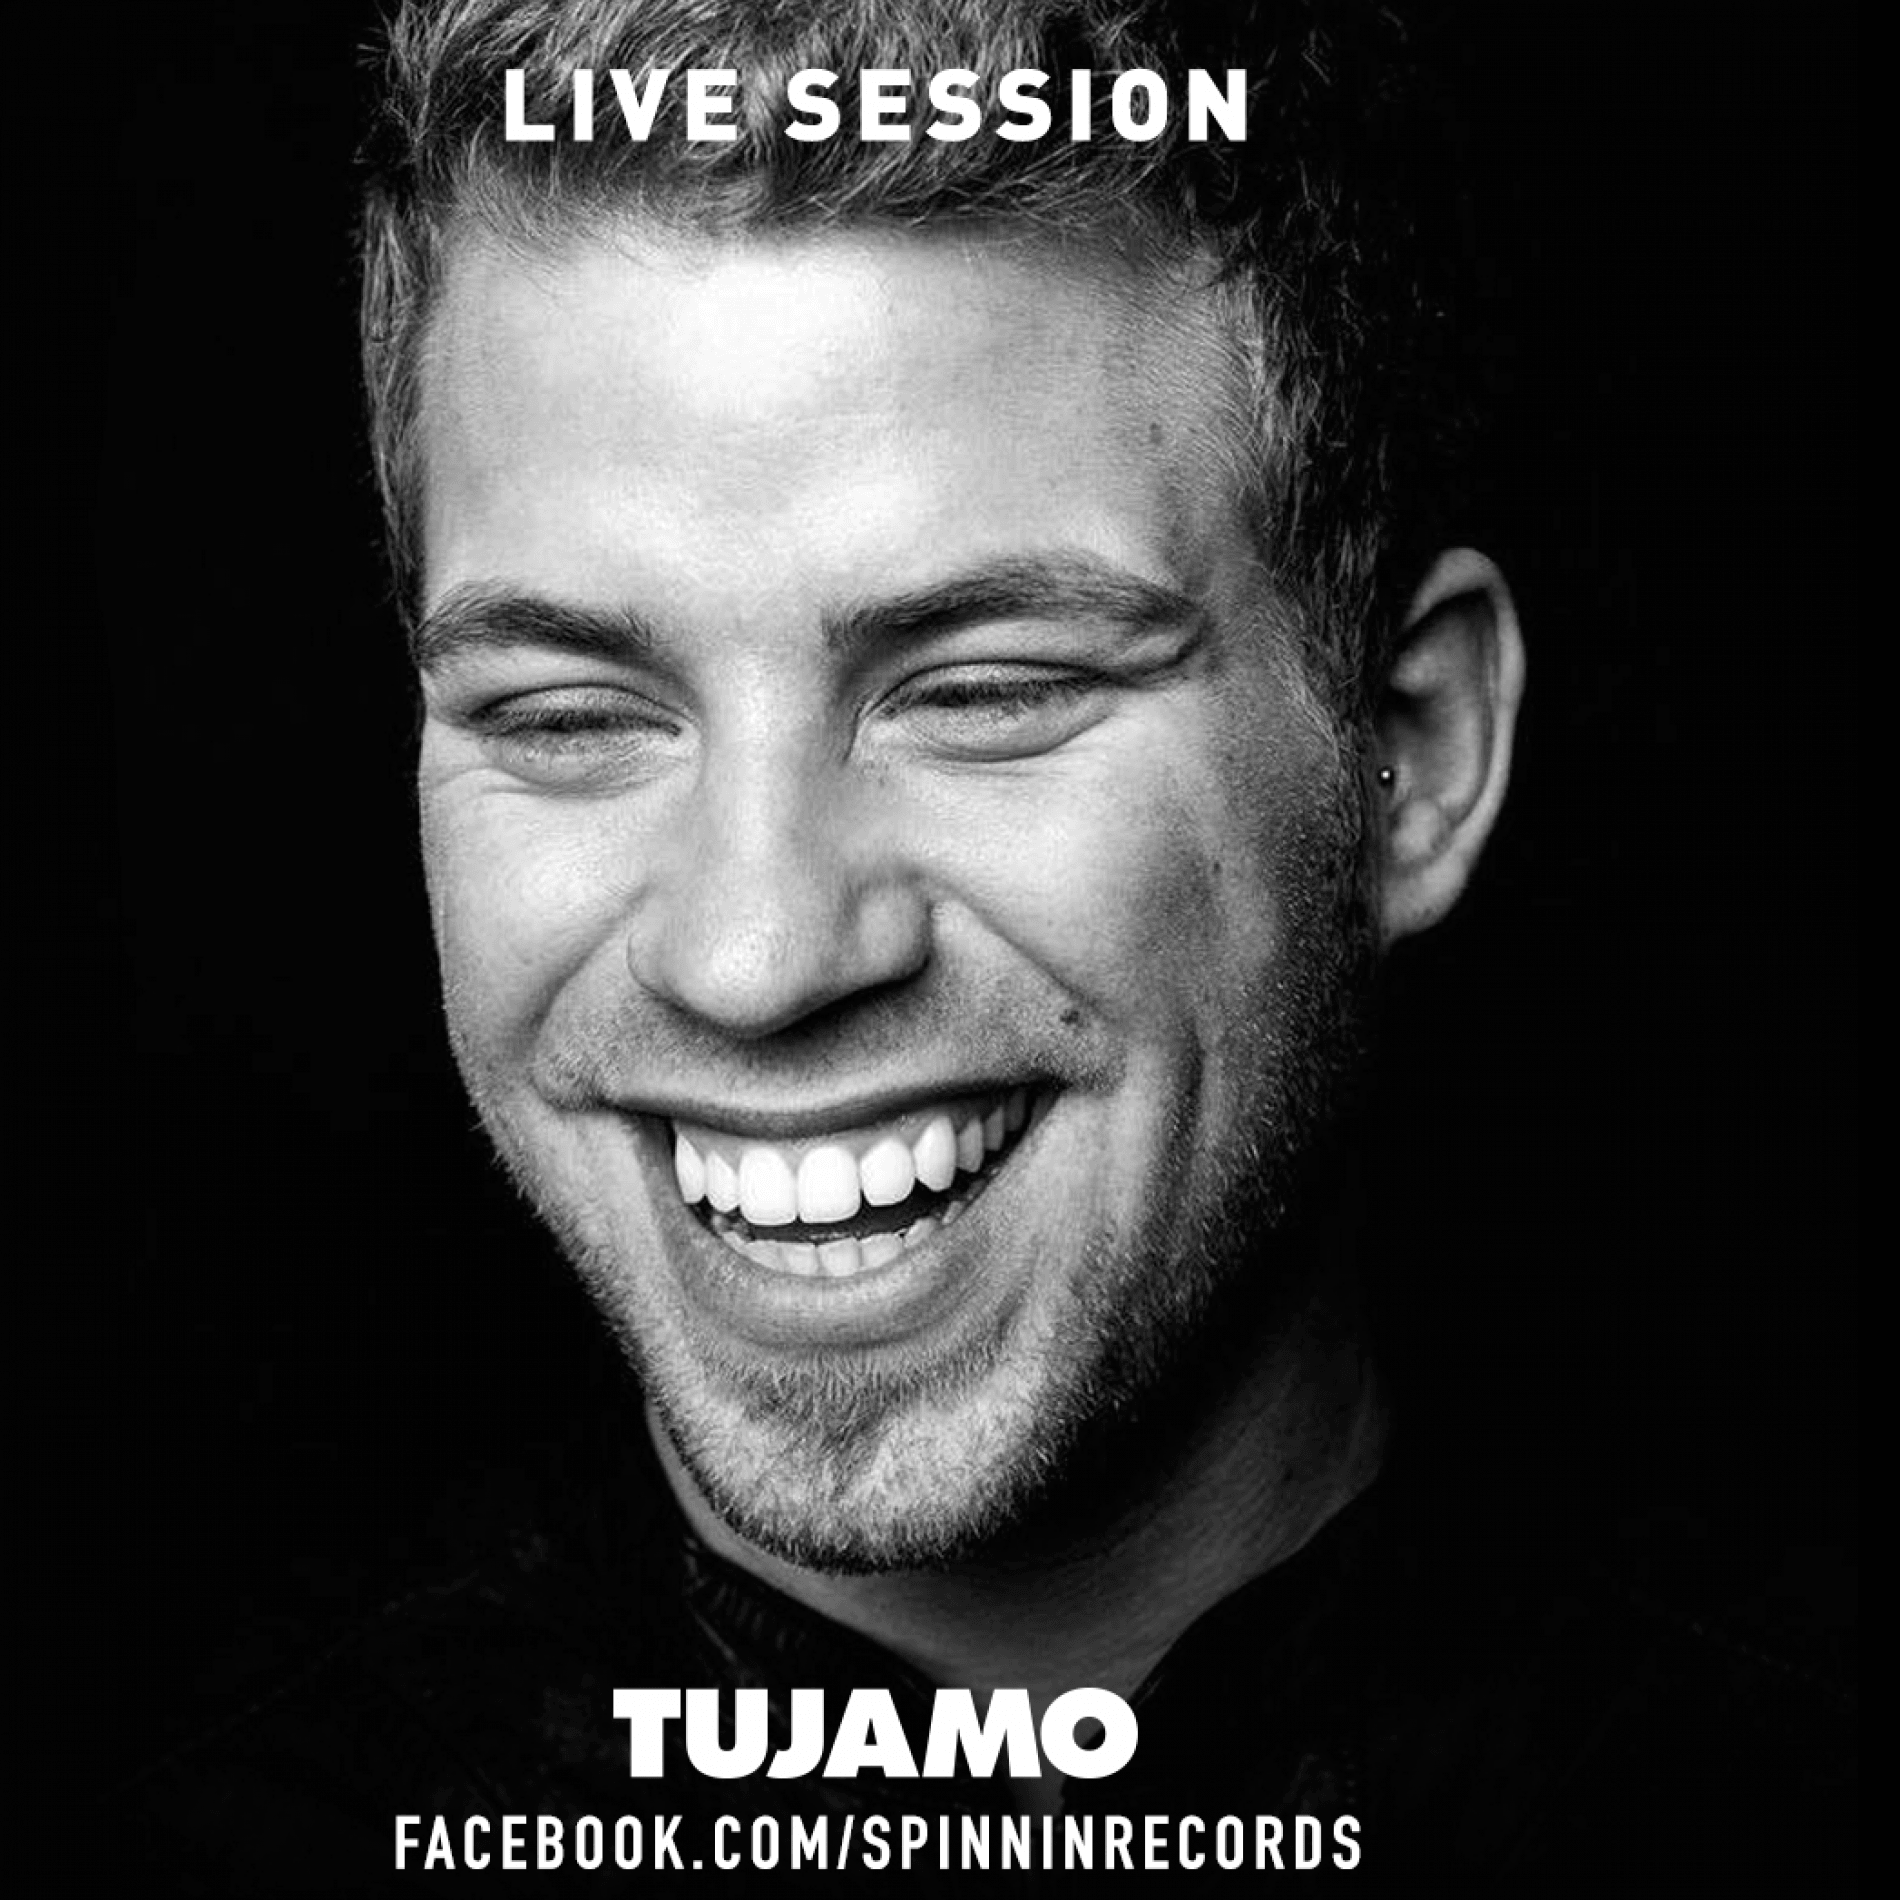 Watch & Listen: live sets by Quintino and Tujamo